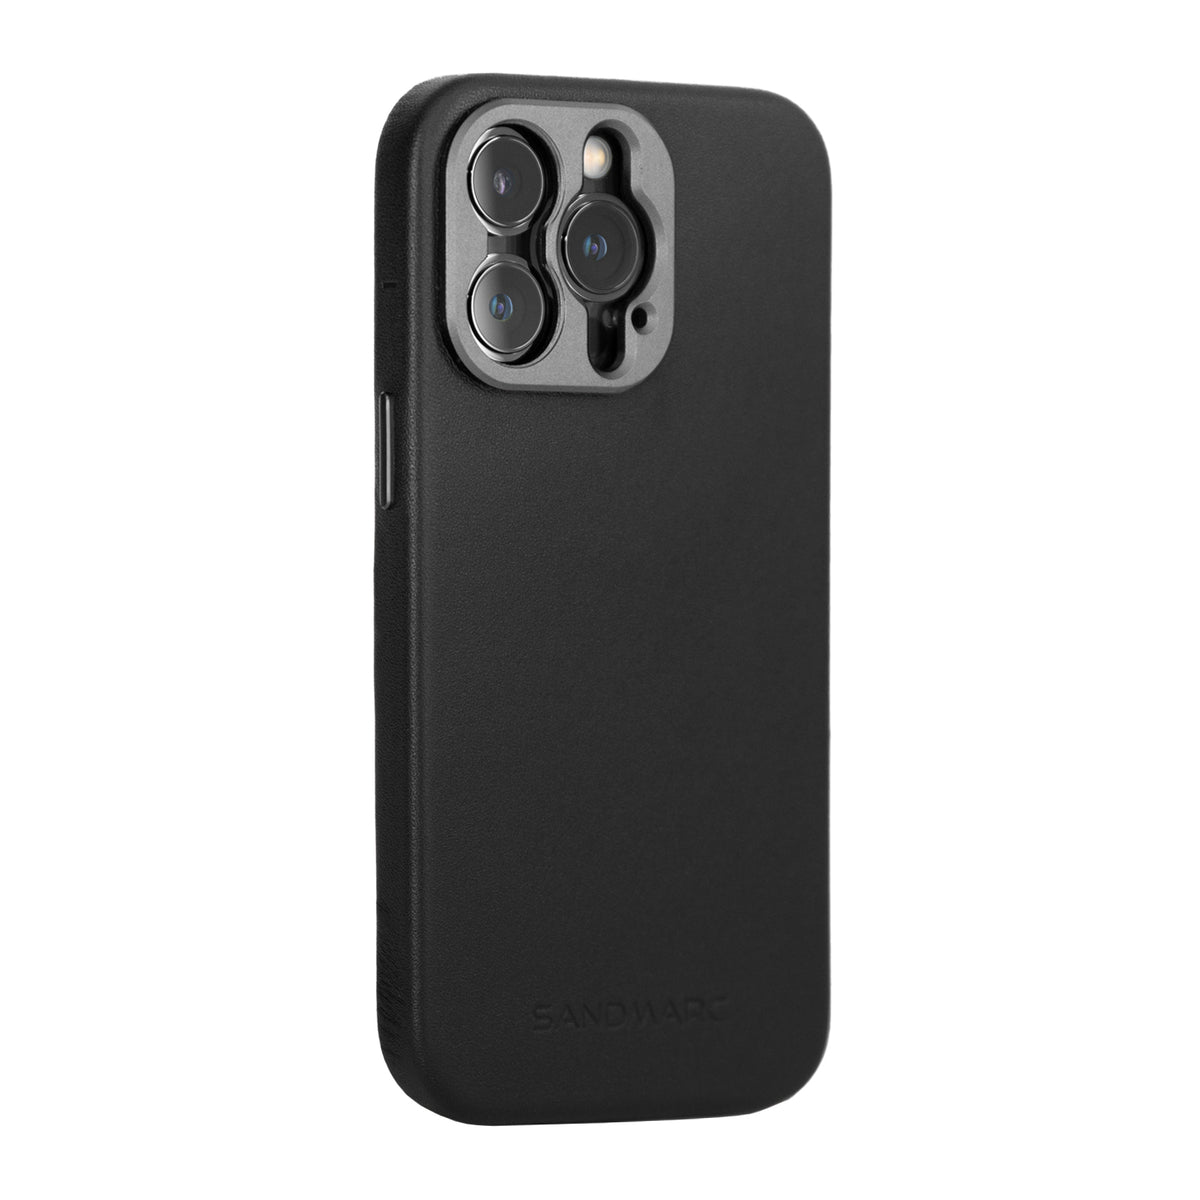 Protection Pack (Black) - iPhone 13 Pro Max Phone Case